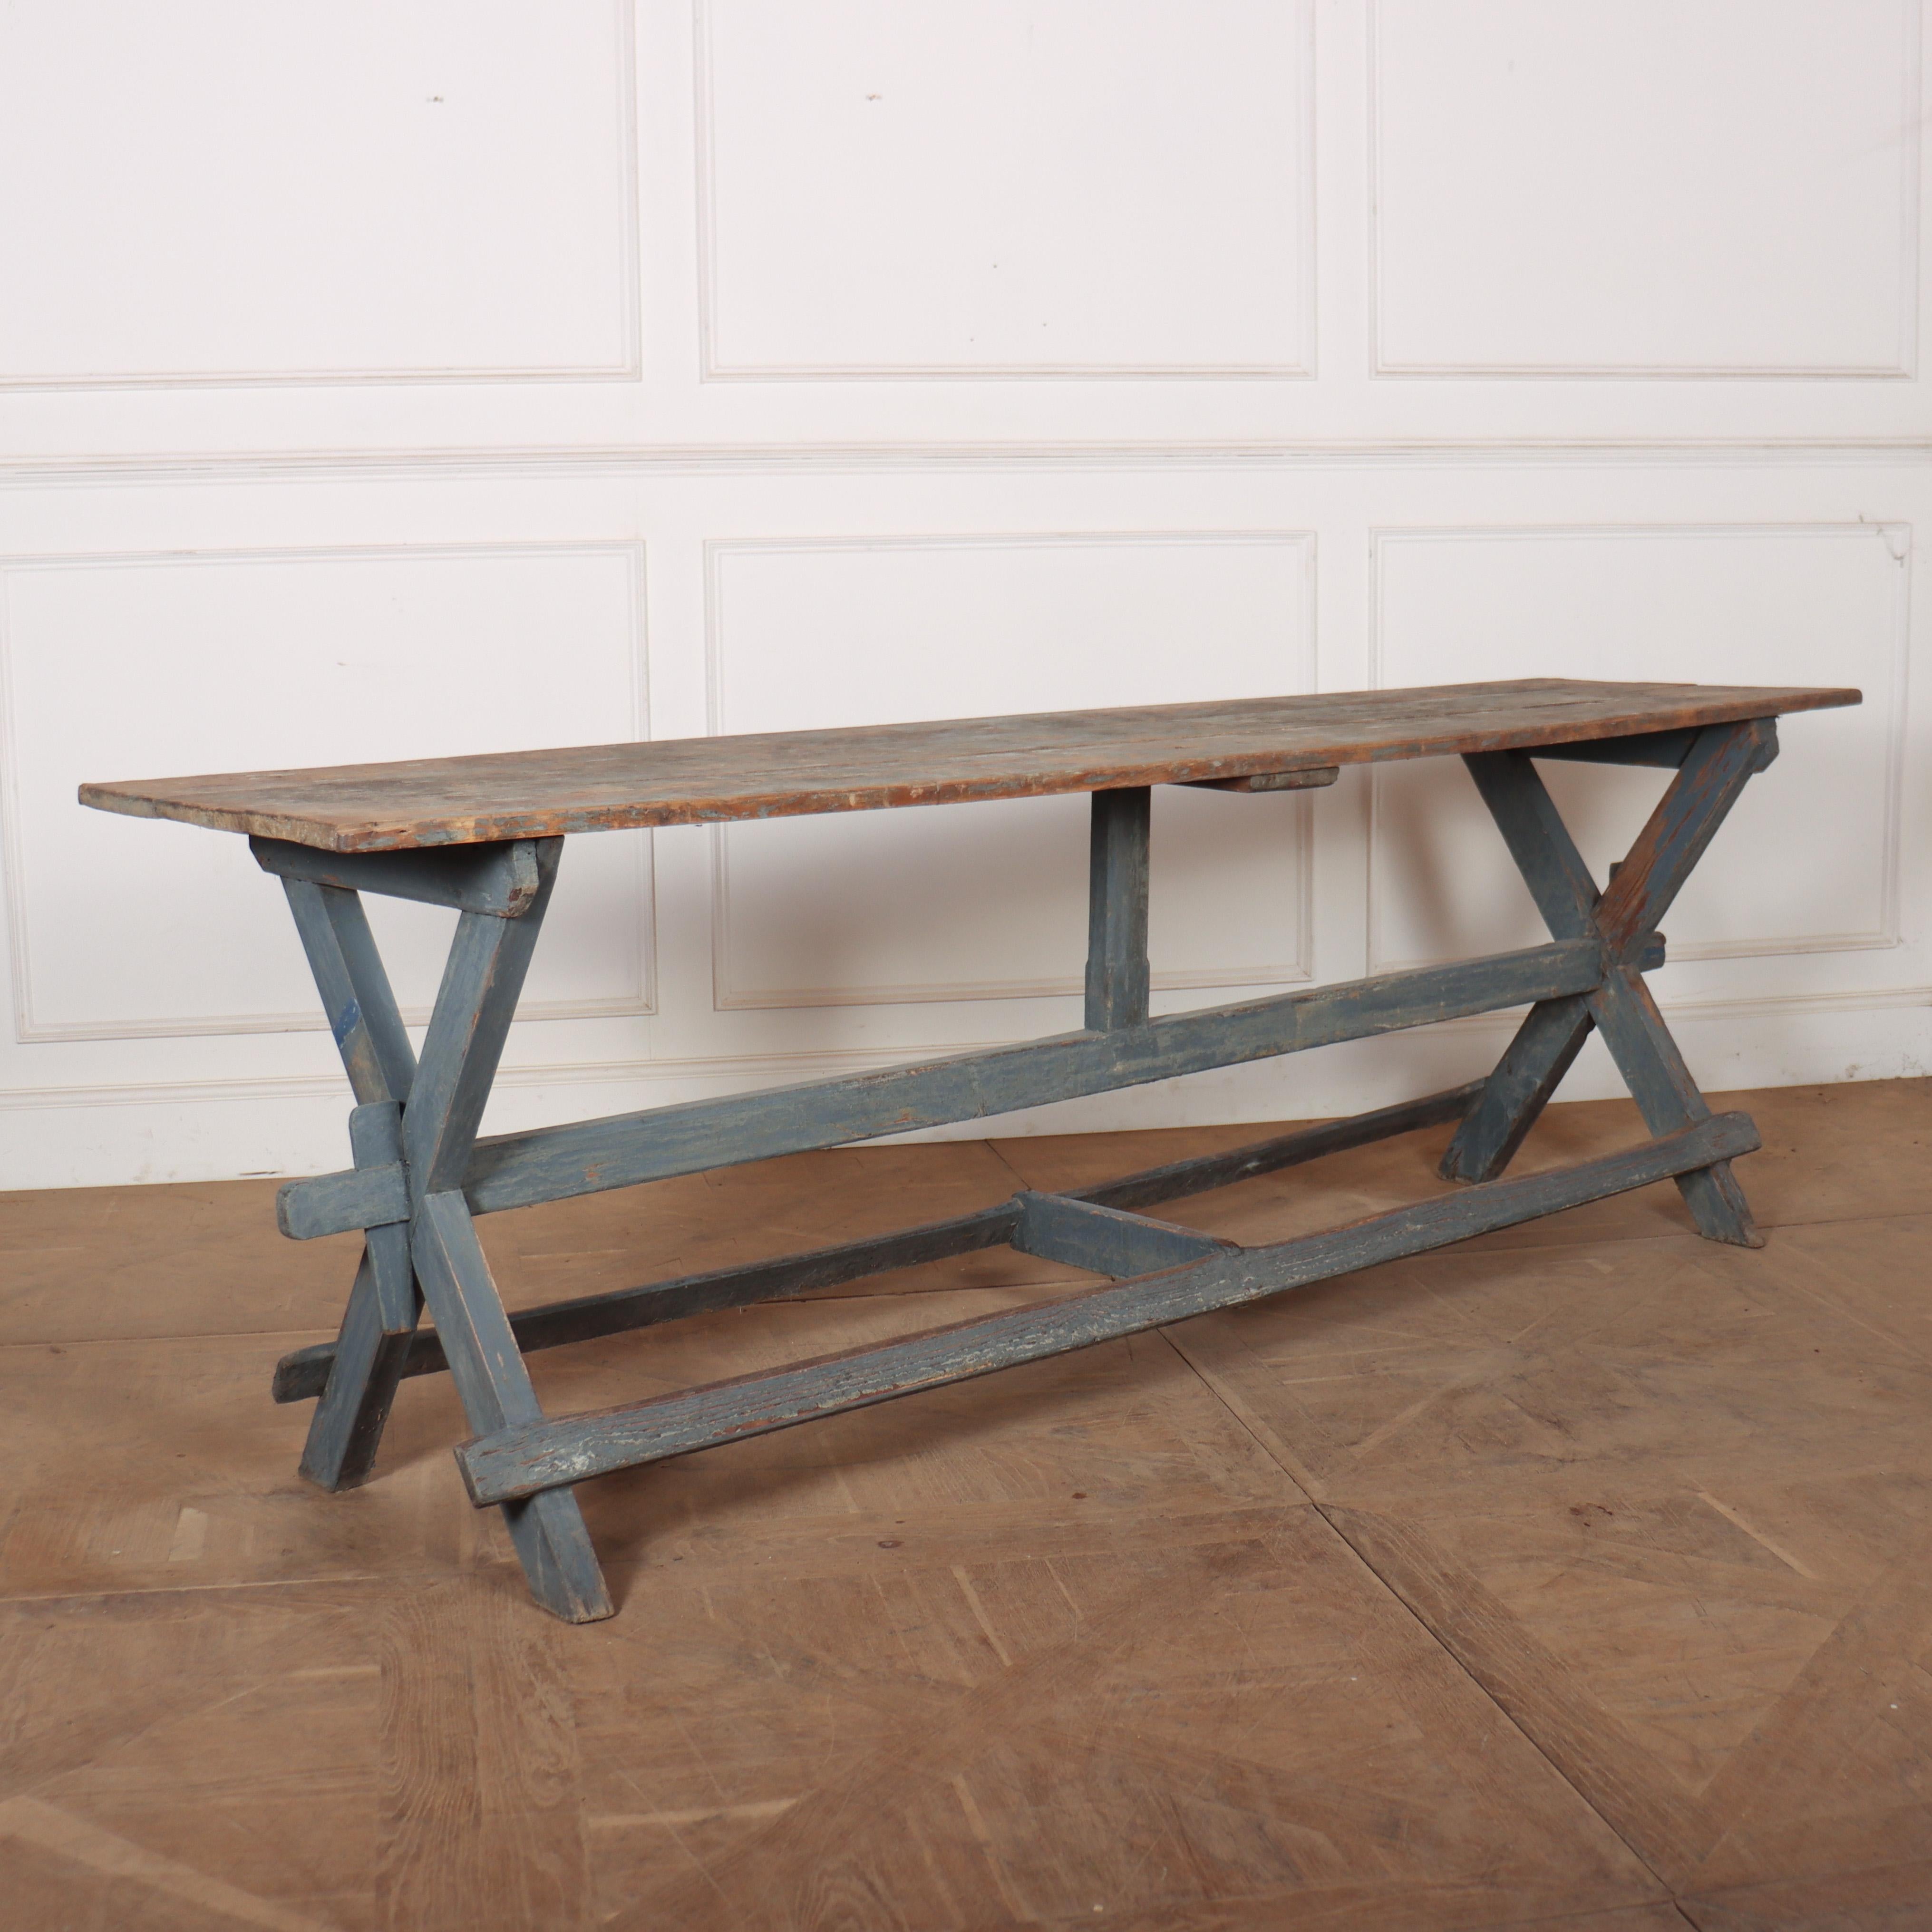 Wonderful English 19th C original painted Tavern table with a great worn finish. 1840

Reference: 8333

Dimensions
89.5 inches (227 cms) Wide
24 inches (61 cms) Deep
32 inches (81 cms) High